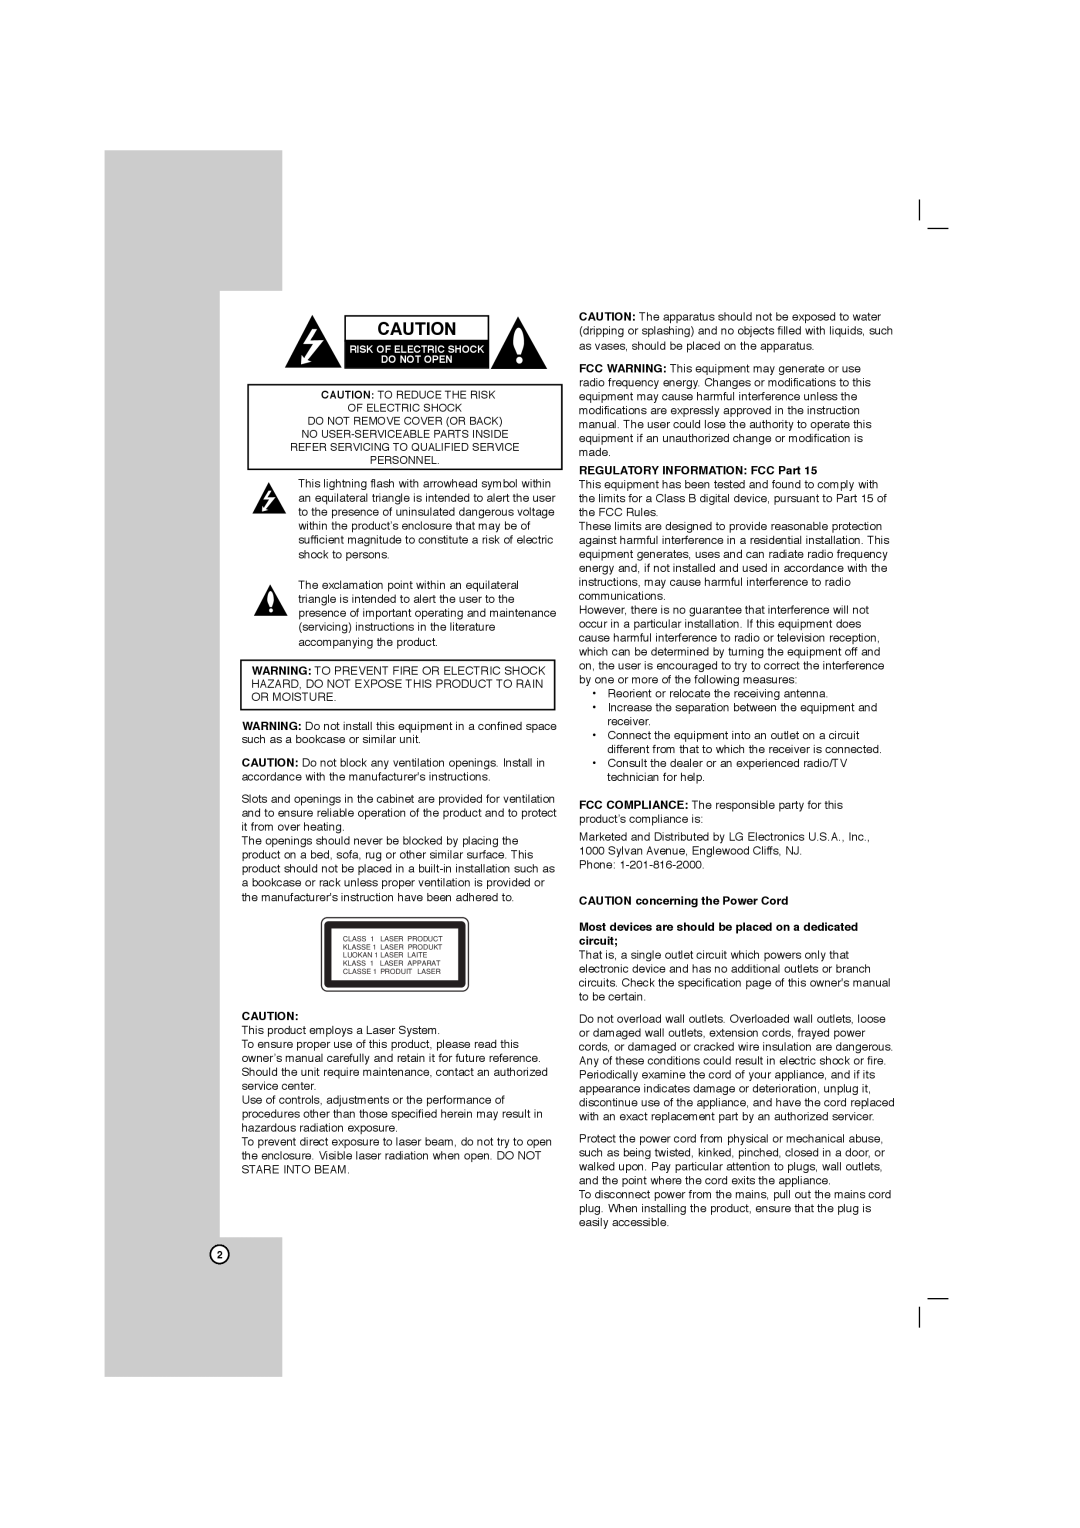 LG Electronics FBS162V, LFD750 owner manual REGULATORY INFORMATION FCC Part, CAUTION concerning the Power Cord 